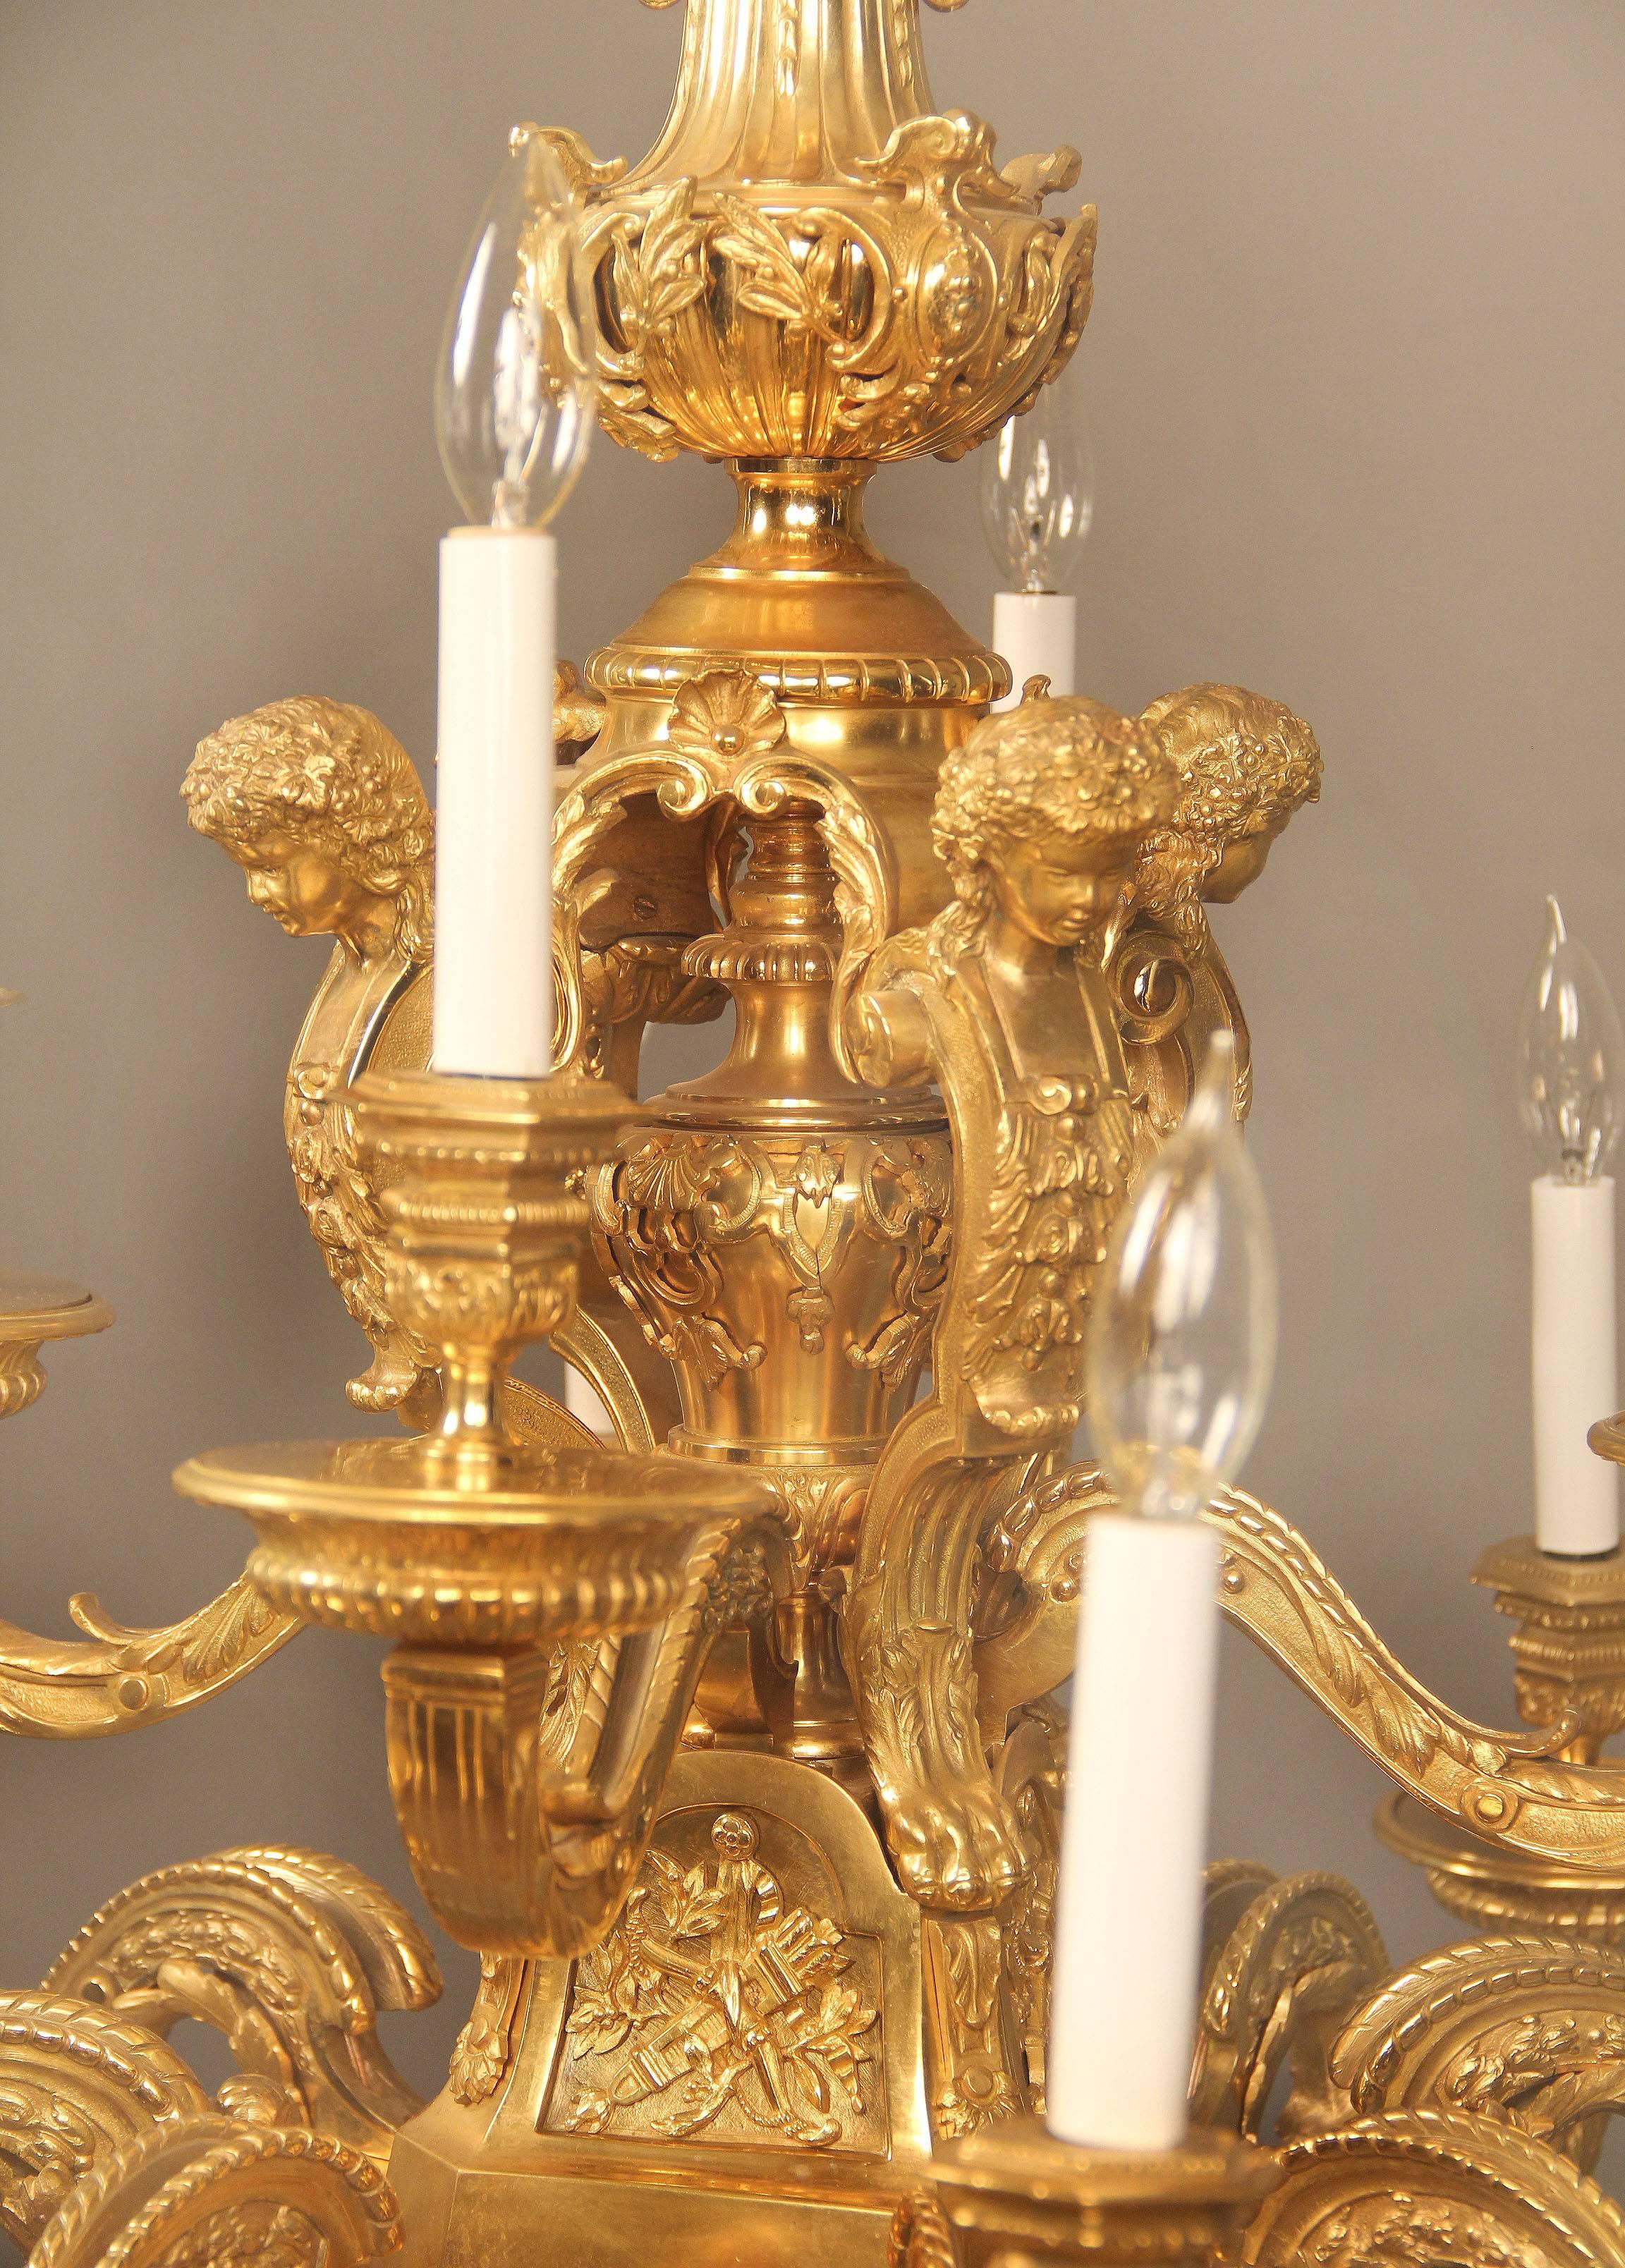 An excellent quality late 19th century gilt bronze 12-light chandelier

The superb all bronze casted frame with foliage and trophy designs along the body and arms, the centre of the body with four cherub busts and four female faces along the base.